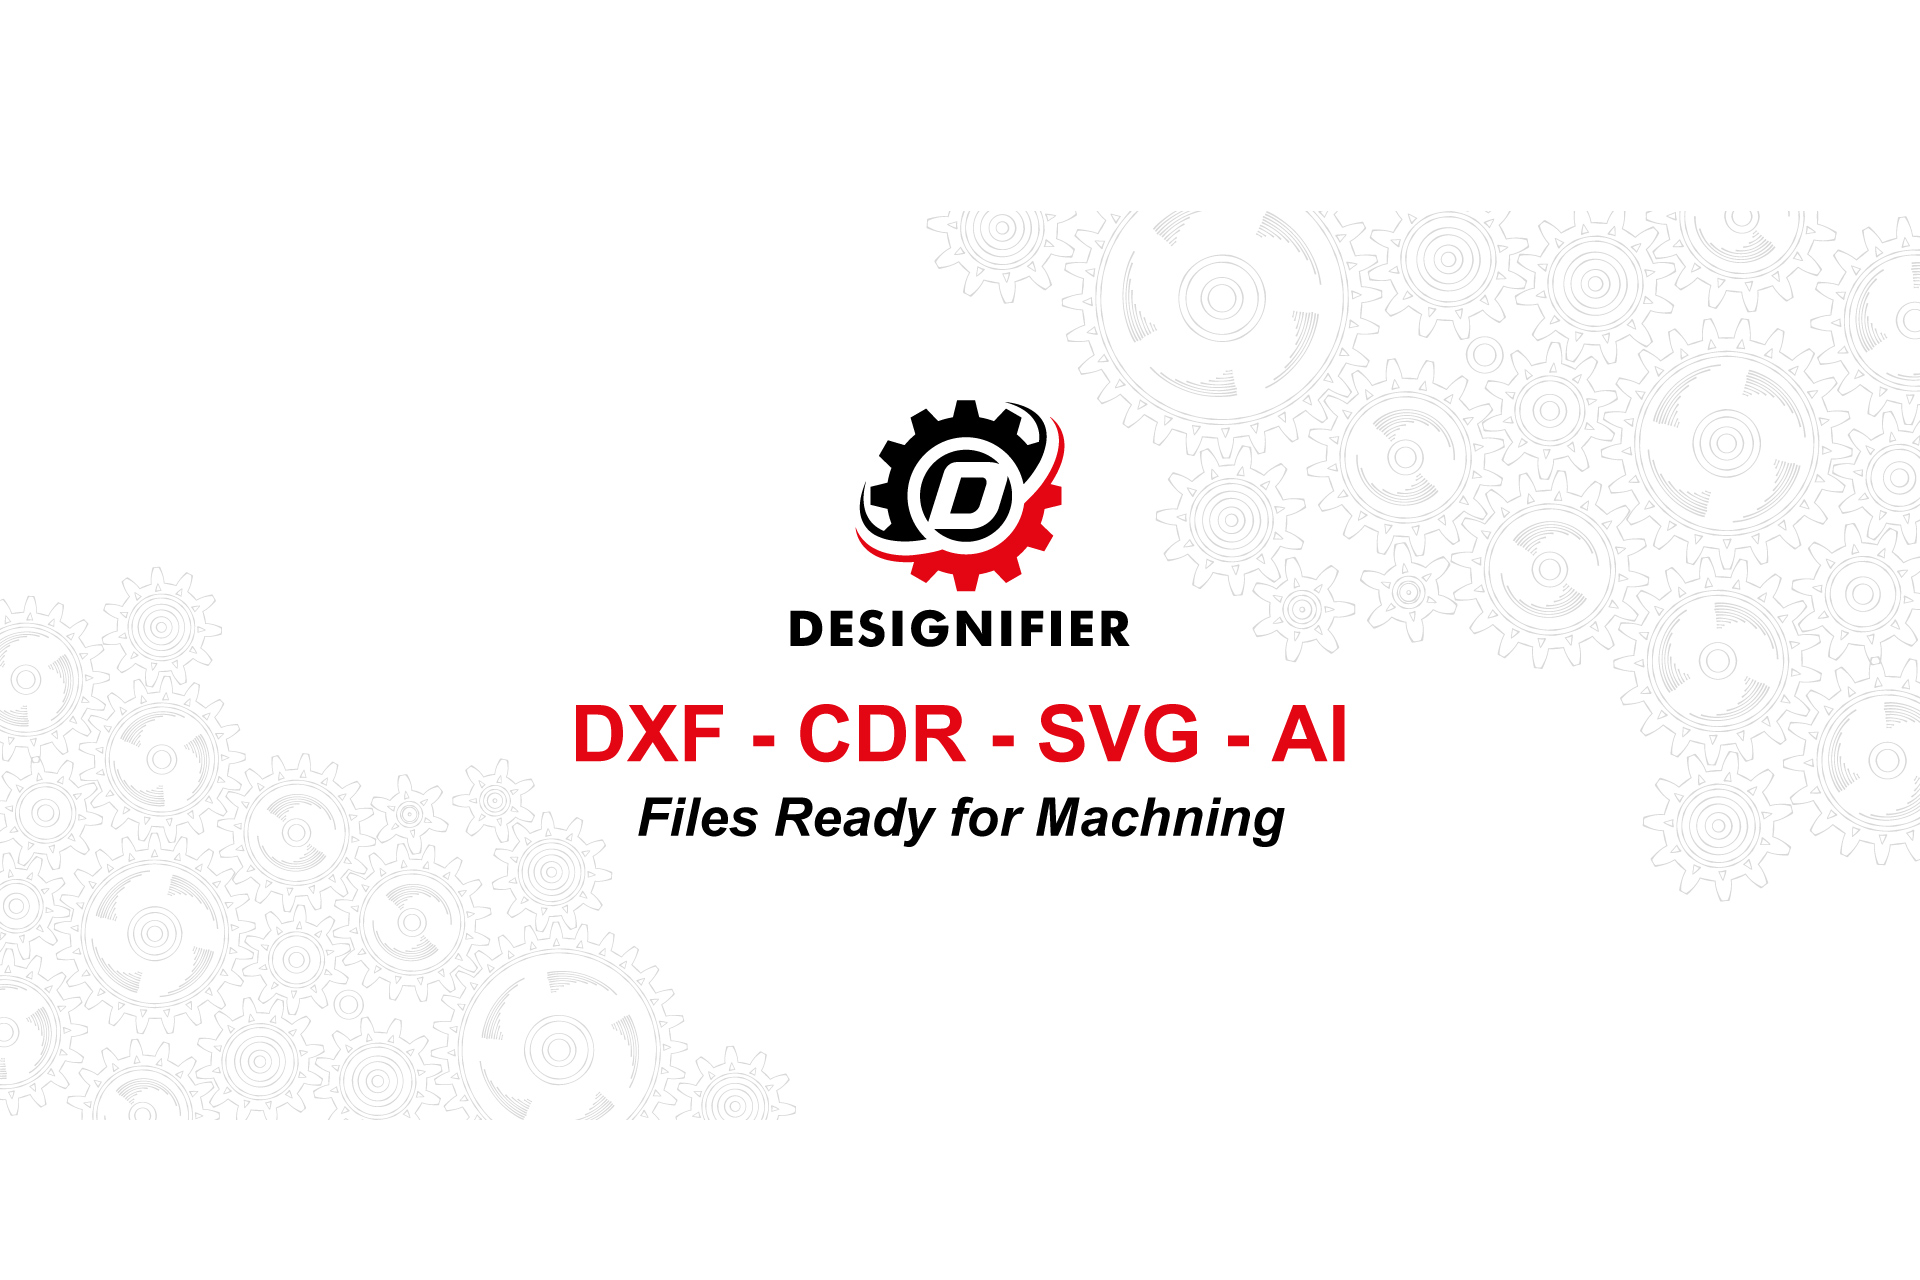 Designifier For DXF SVG CDR Vector Files for all Manufacturing purposes